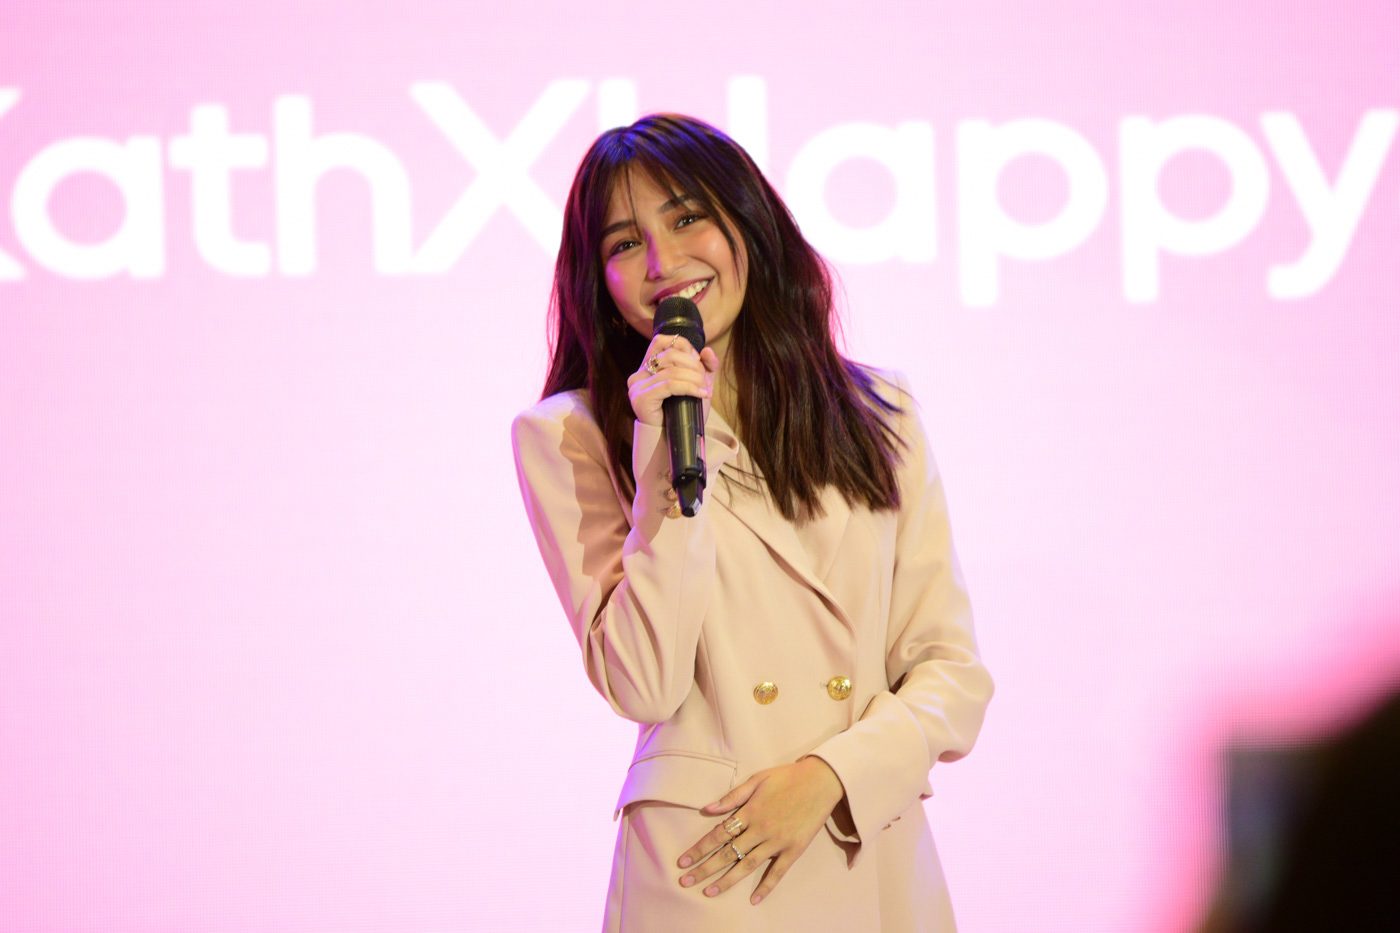 IN PHOTOS: Kathryn Bernardo launches Happy Skin collection